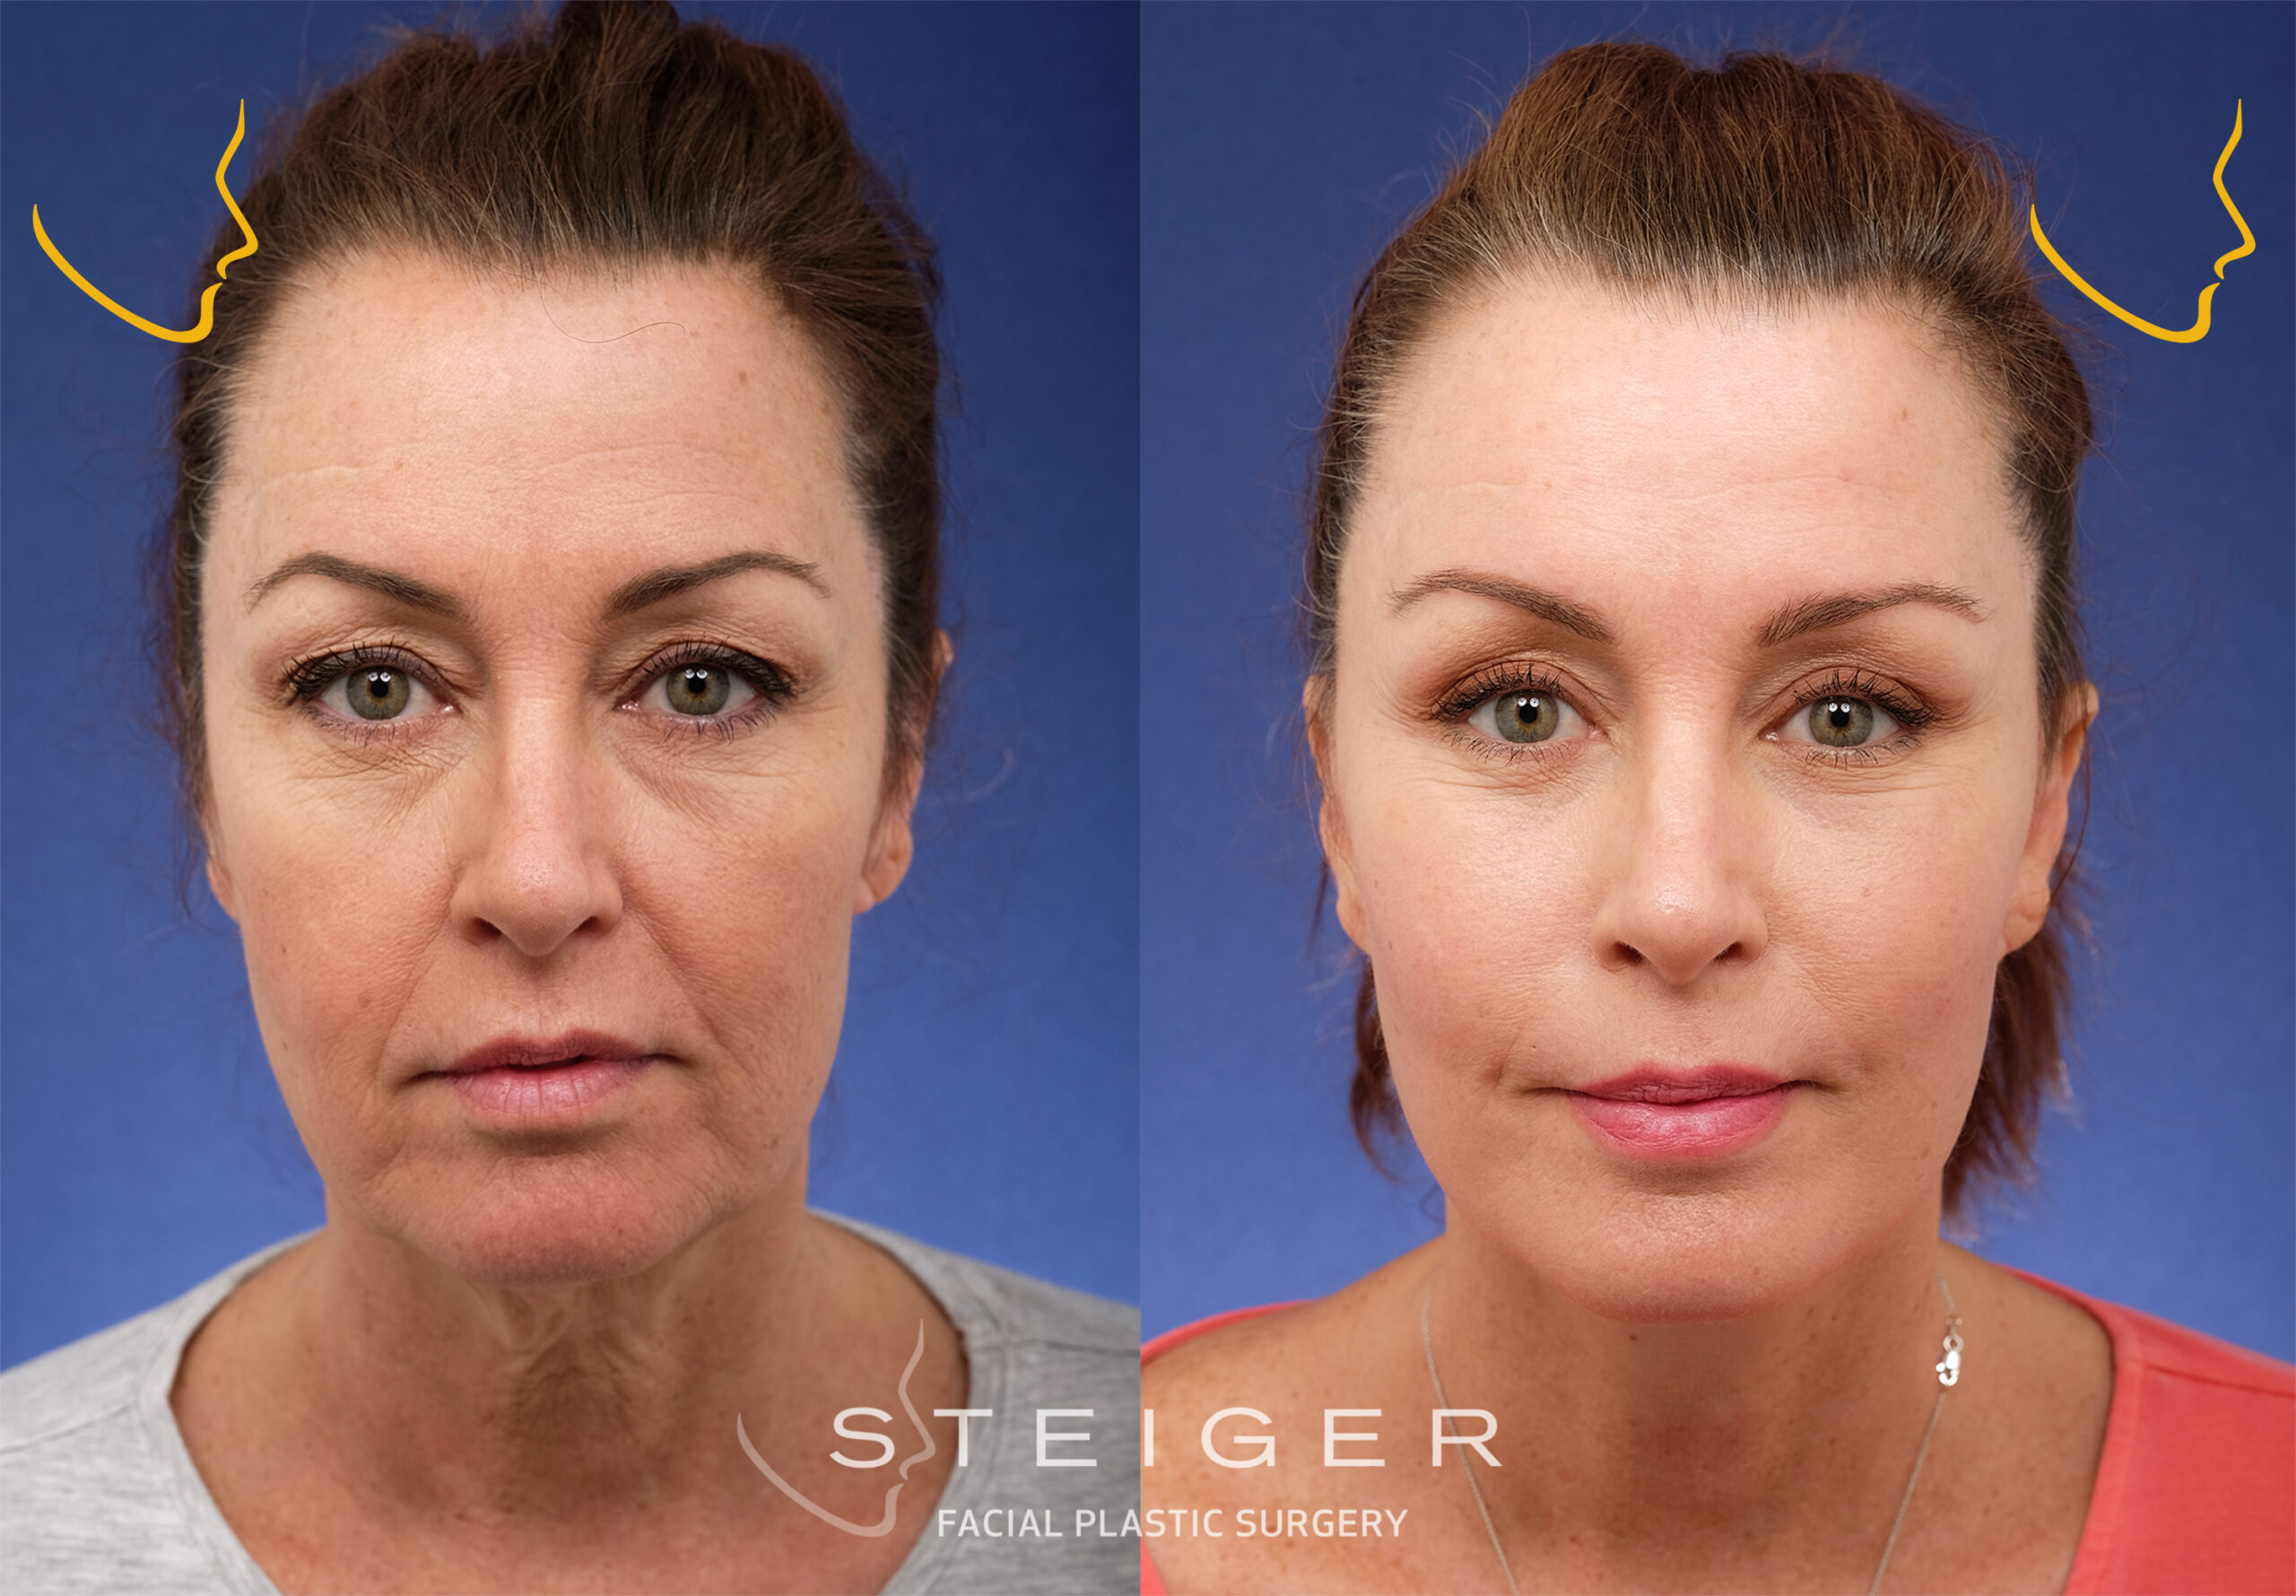 Does Facelift Surgery Gives You a Wrinkle Free Face?